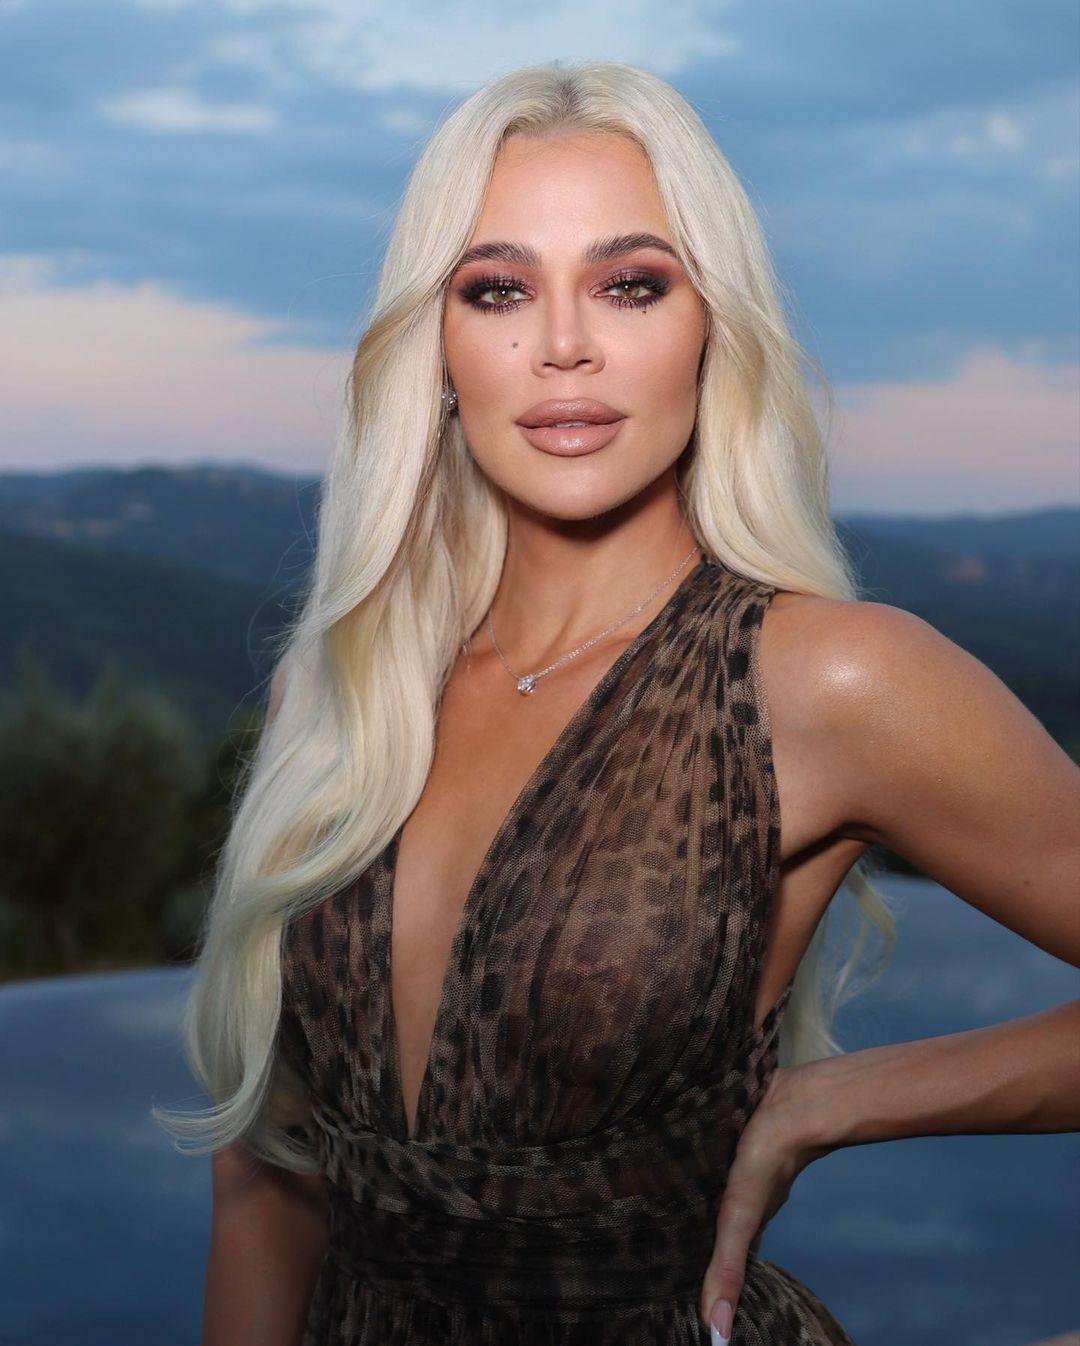 Khloe Kardashian Gives Fans Special View Of Her Curves In Sheer Gown